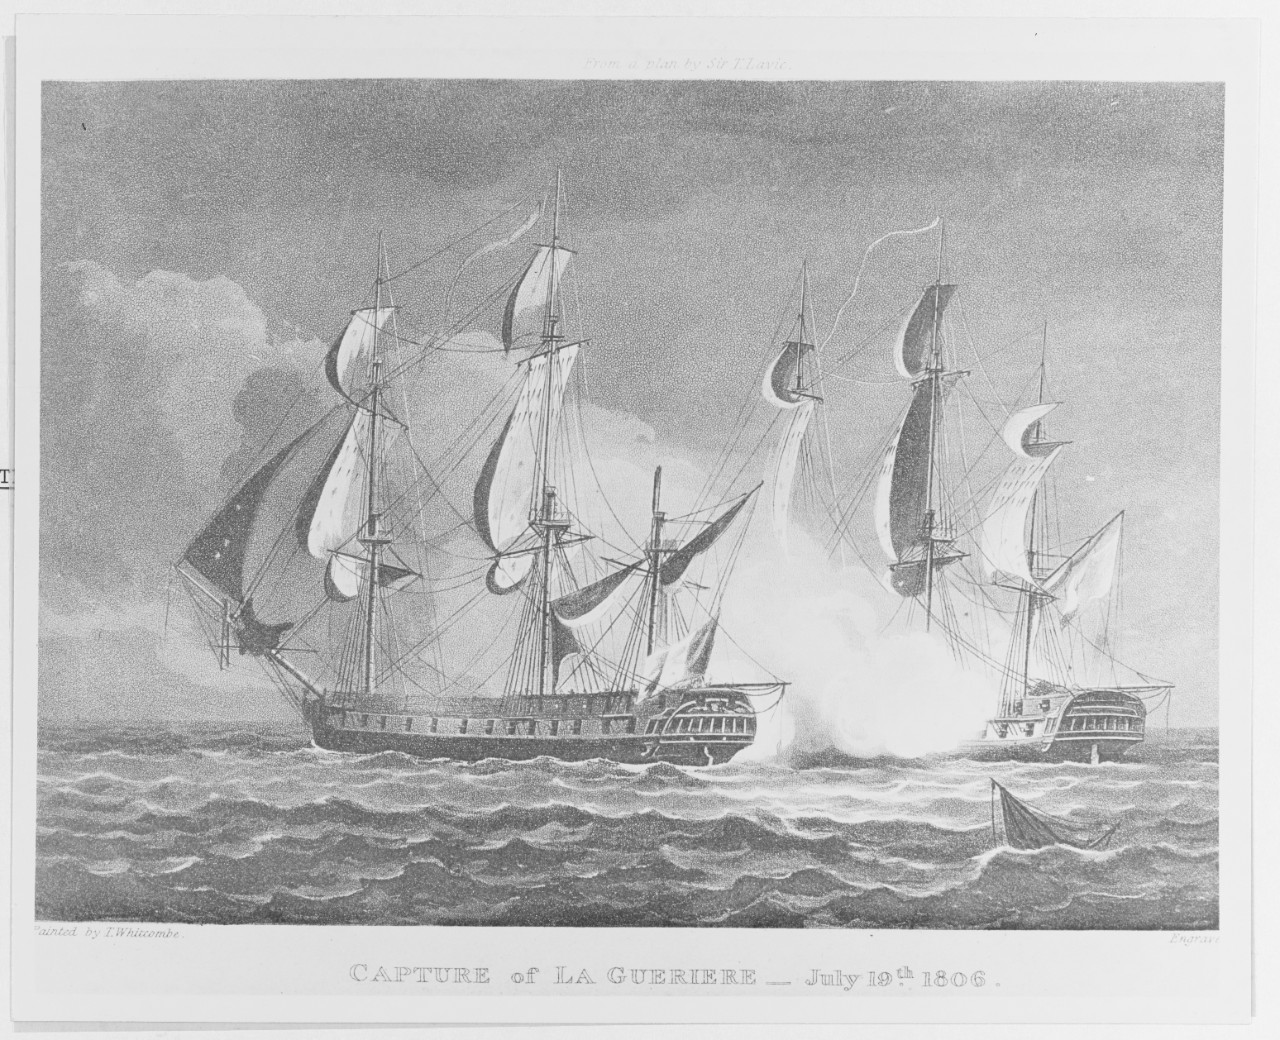 HMS BLANCHE vs. French frigate GUERRIERE, 19 July 1806.